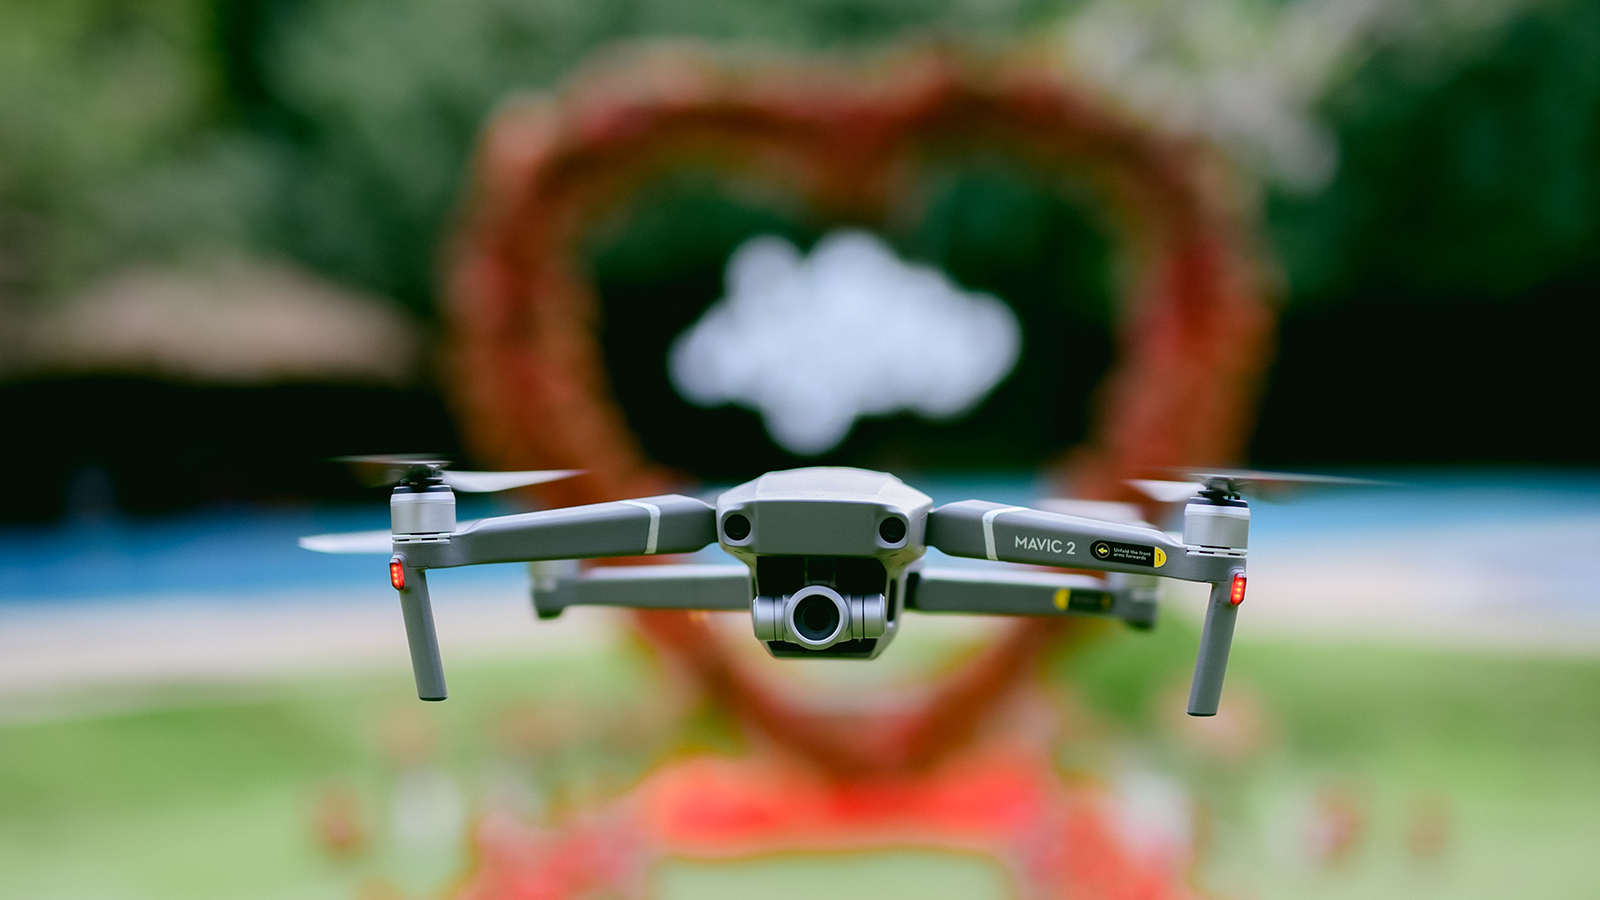 Piliyandala, Sri Lanka - November 2022 : Dji Mavic 2 Zoom drone in the air during an engagement proposal event. Outdoor marry me party decorations made from roses.